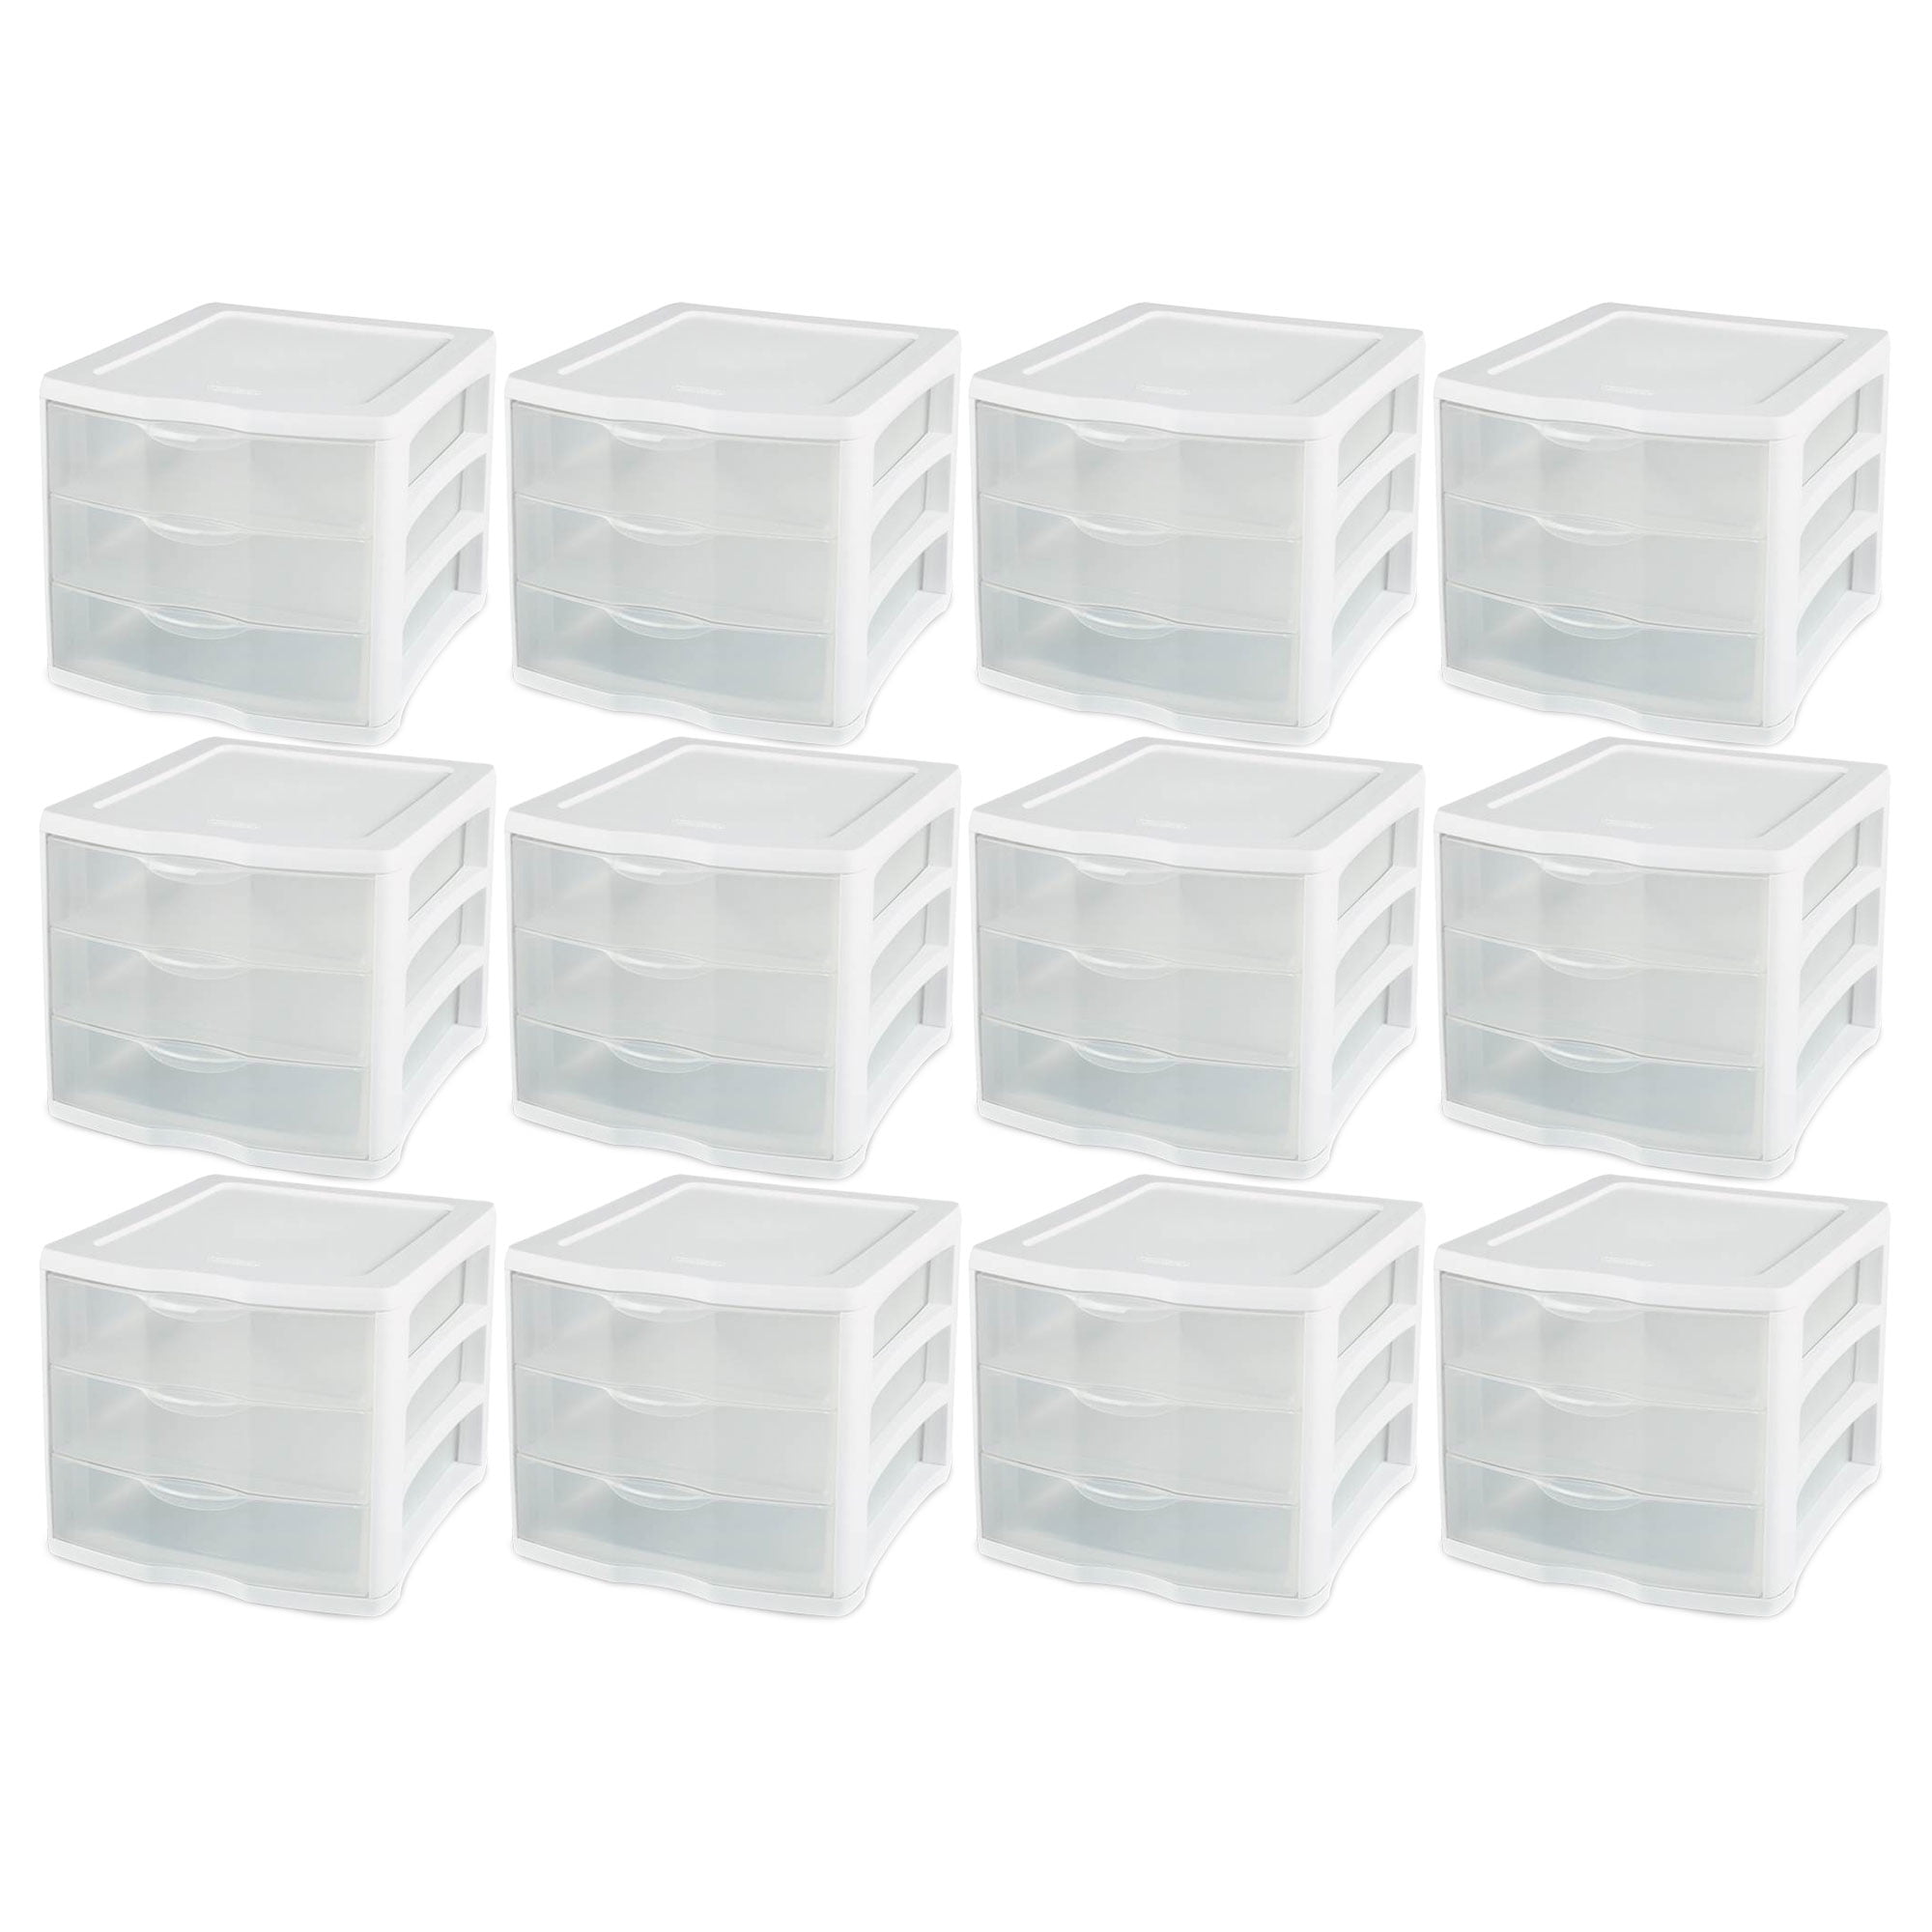 Details about   Plastic Storage Drawers Clear Rack Container Sterilite Bin Cabinet Organizer 